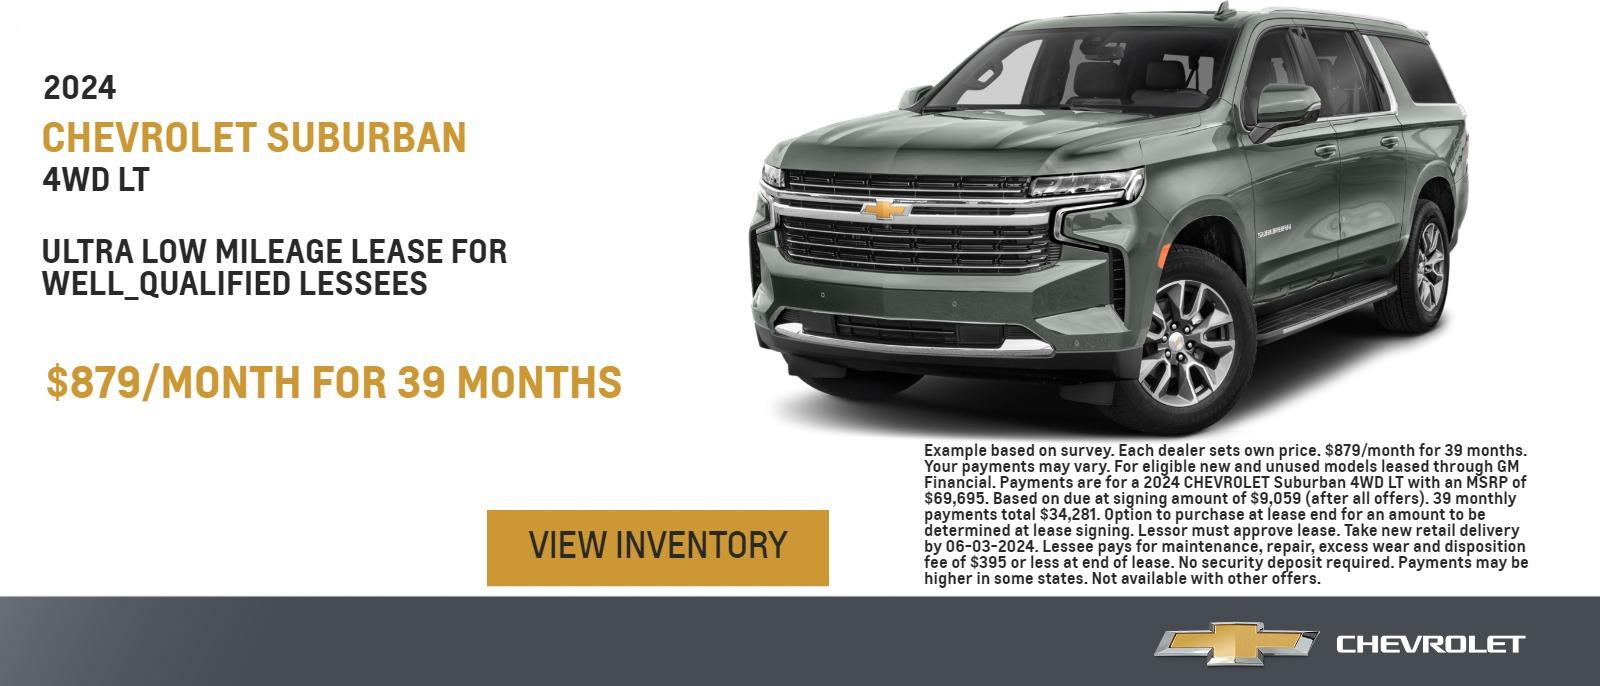 Chevrolet National Lease Offer
Ultra Low-Mileage Lease for Well-Qualified Lessees.
$879/month for 39 months.